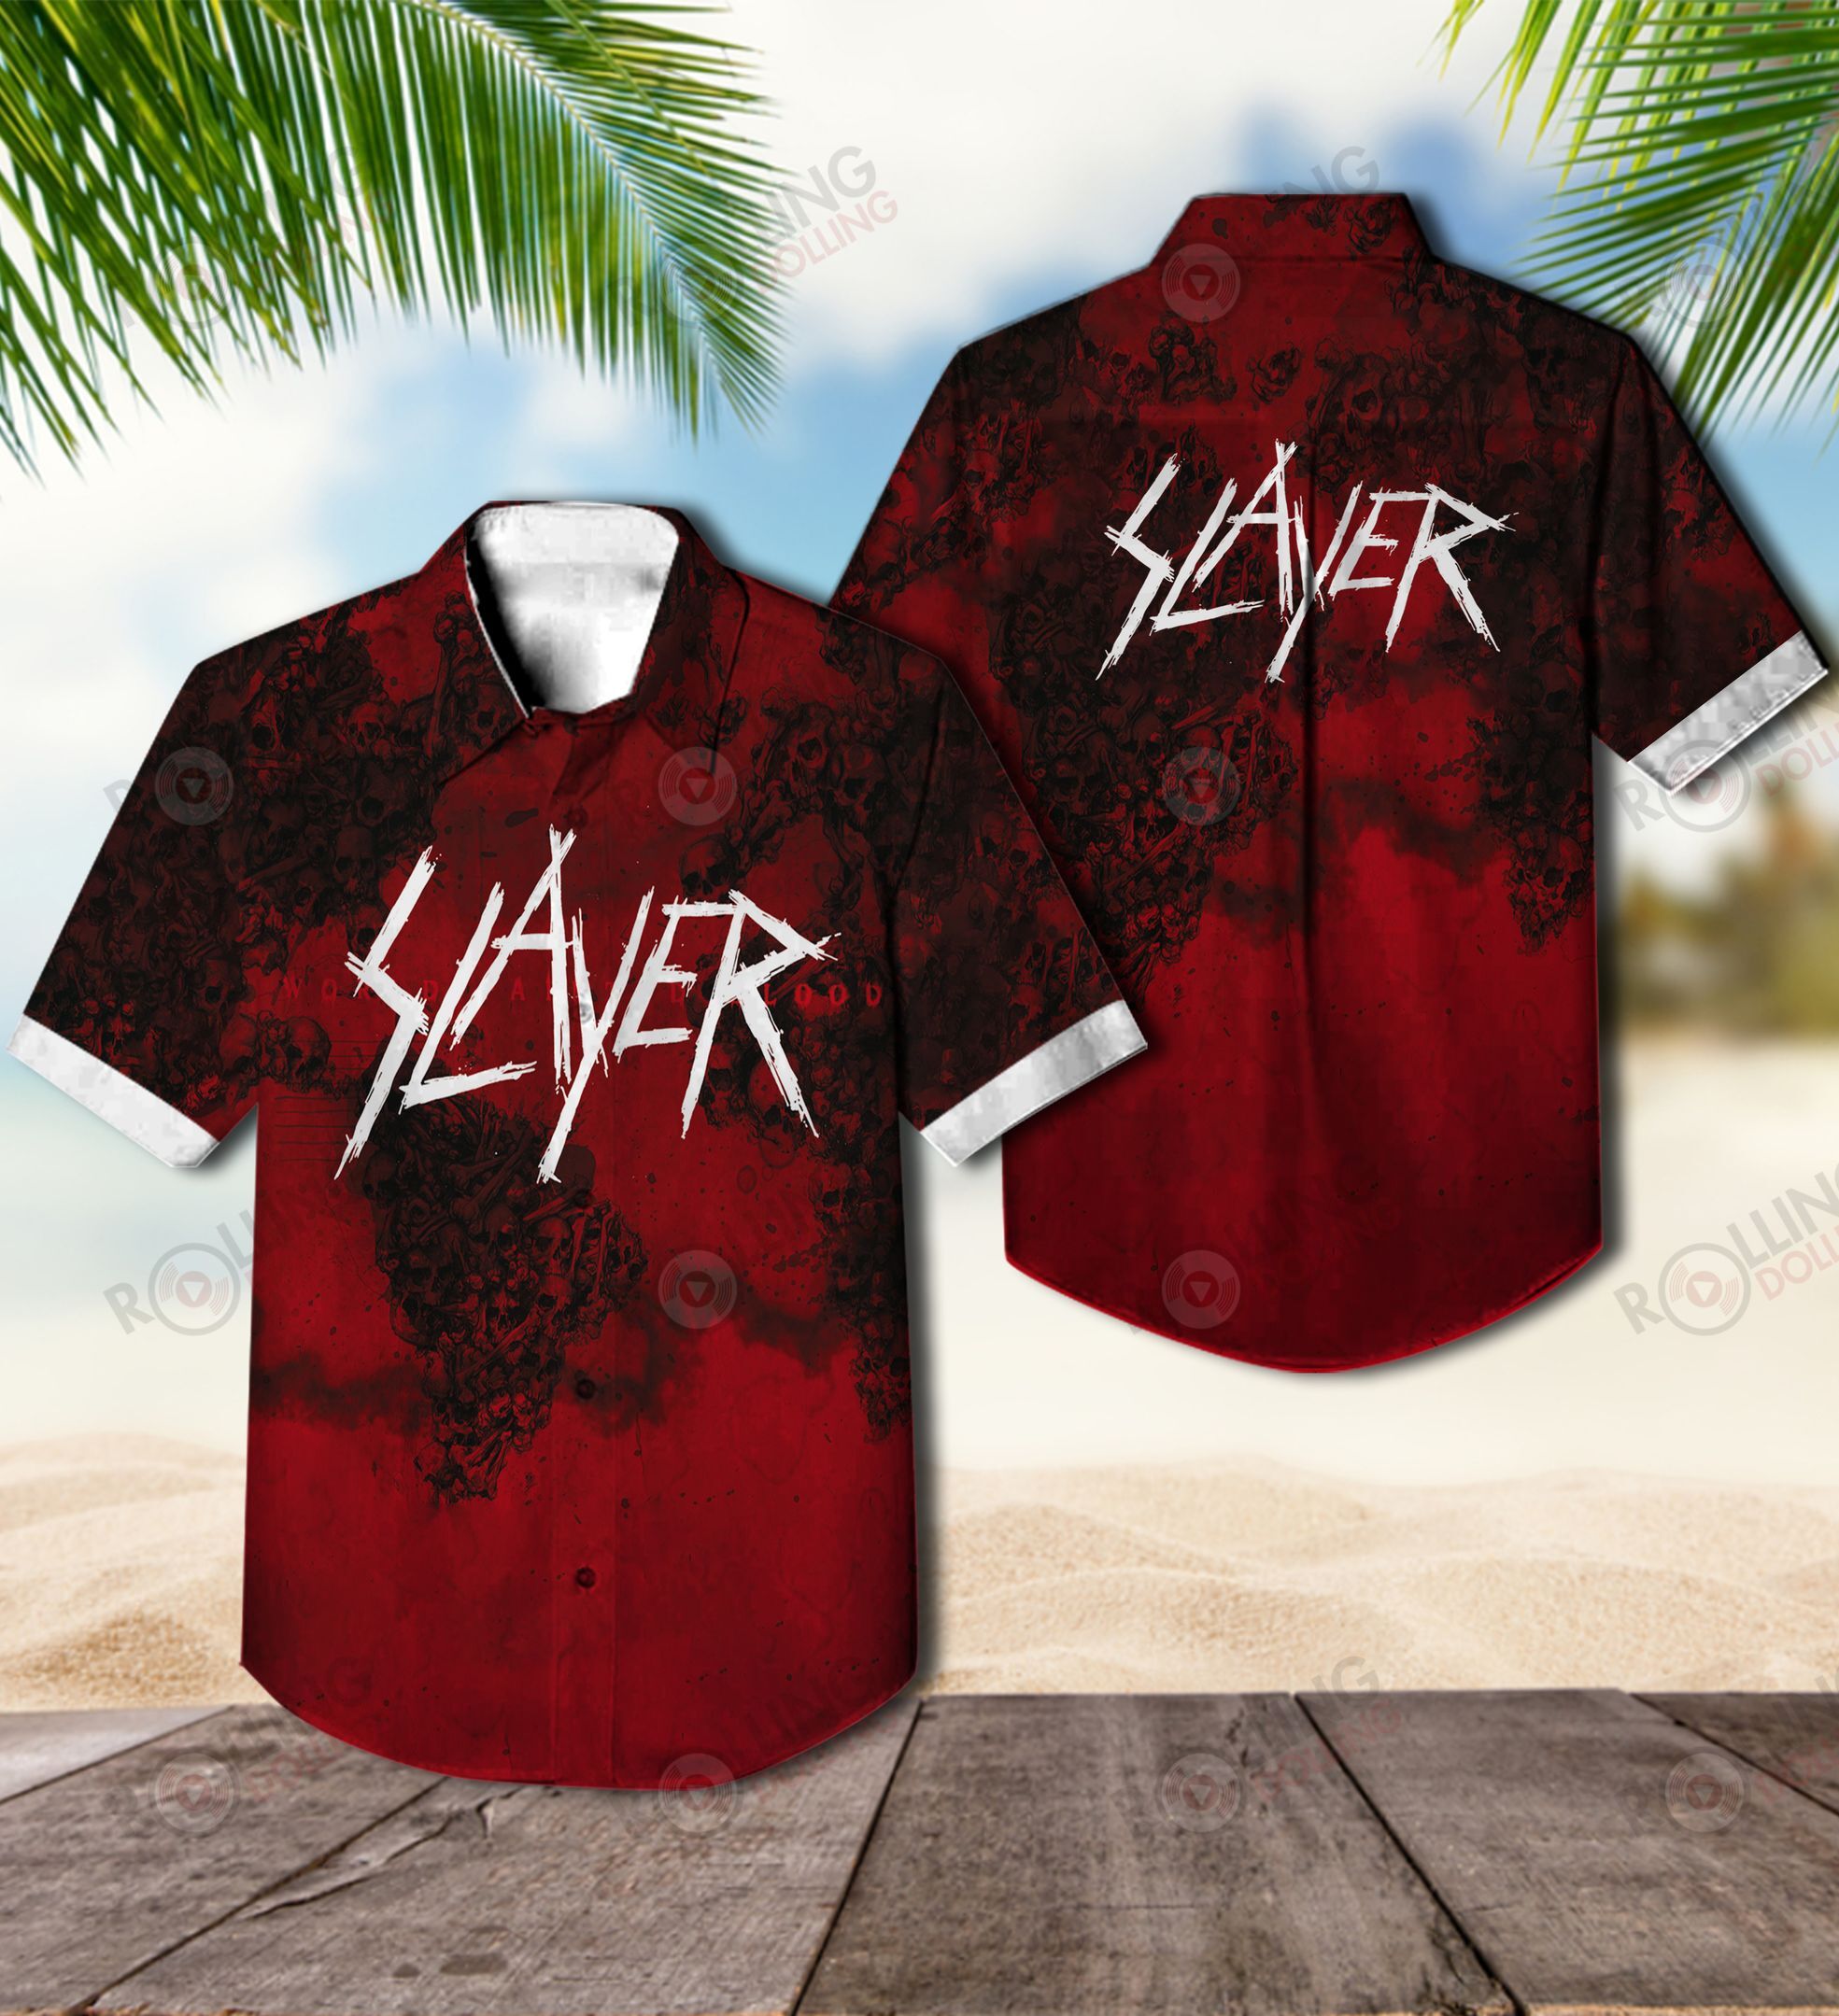 The Hawaiian Shirt is a popular shirt that is worn by Rock band fans 29